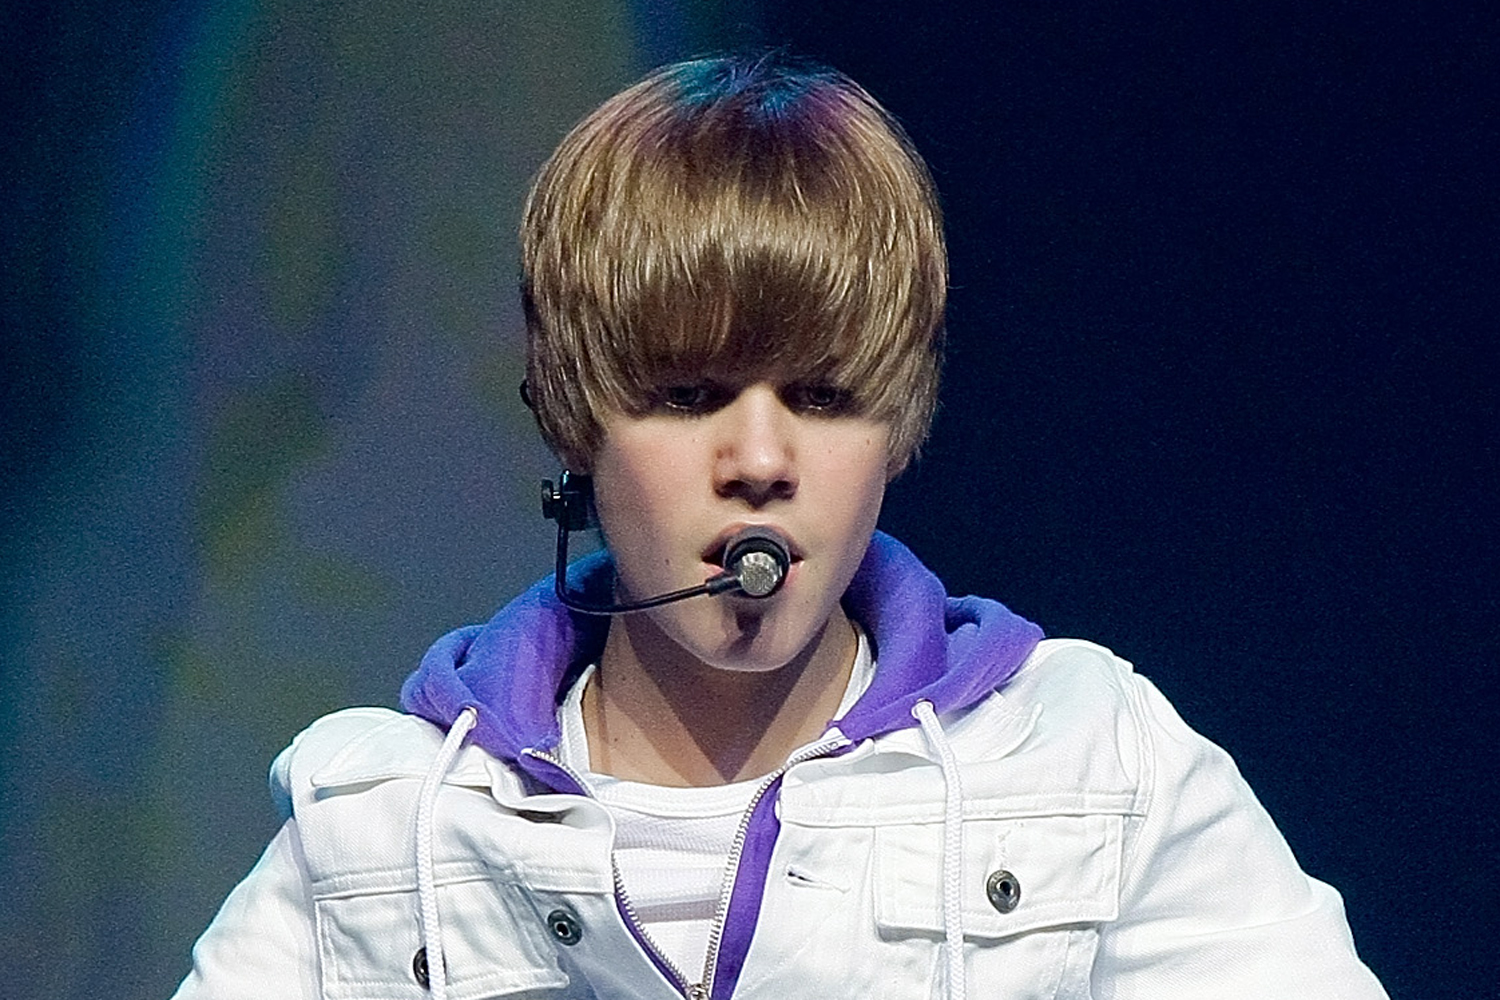 Justin Bieber performs at his 'My World Tour' at Nokia Live on July 20, 2010, in Los Angeles, California. ((Photo by Noel Vasquez/Getty Images)